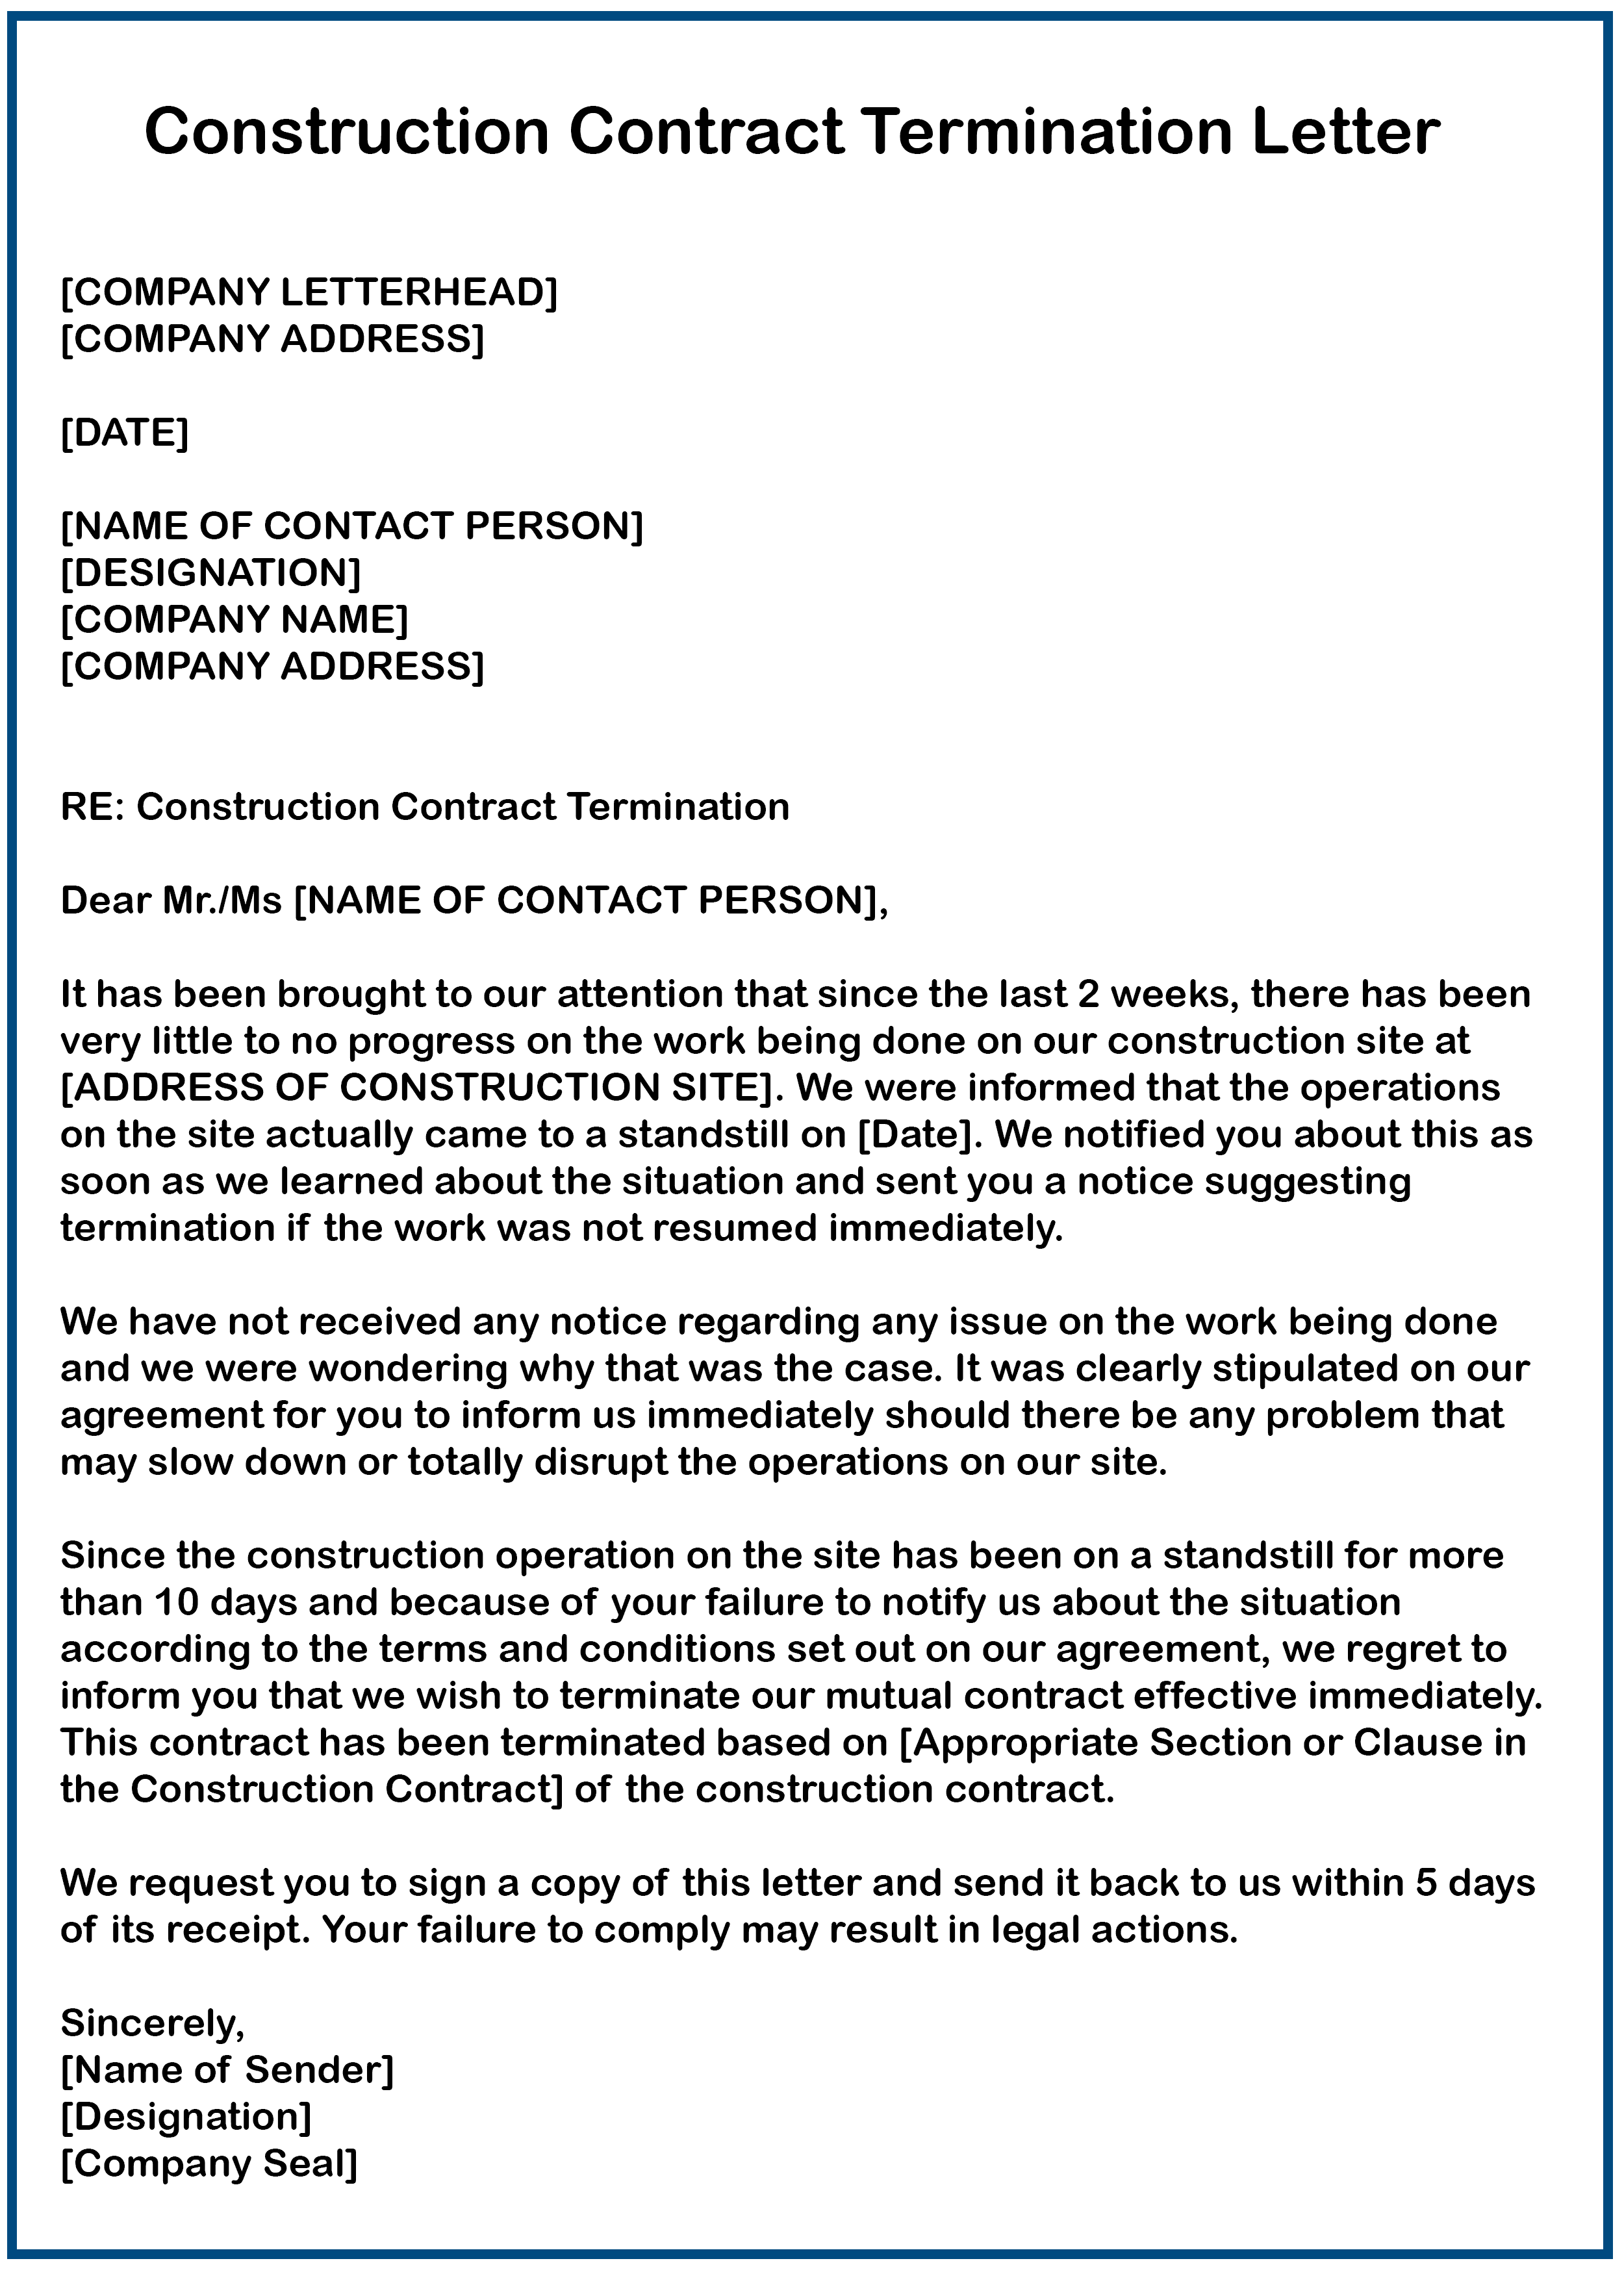 Contract Termination Letter template